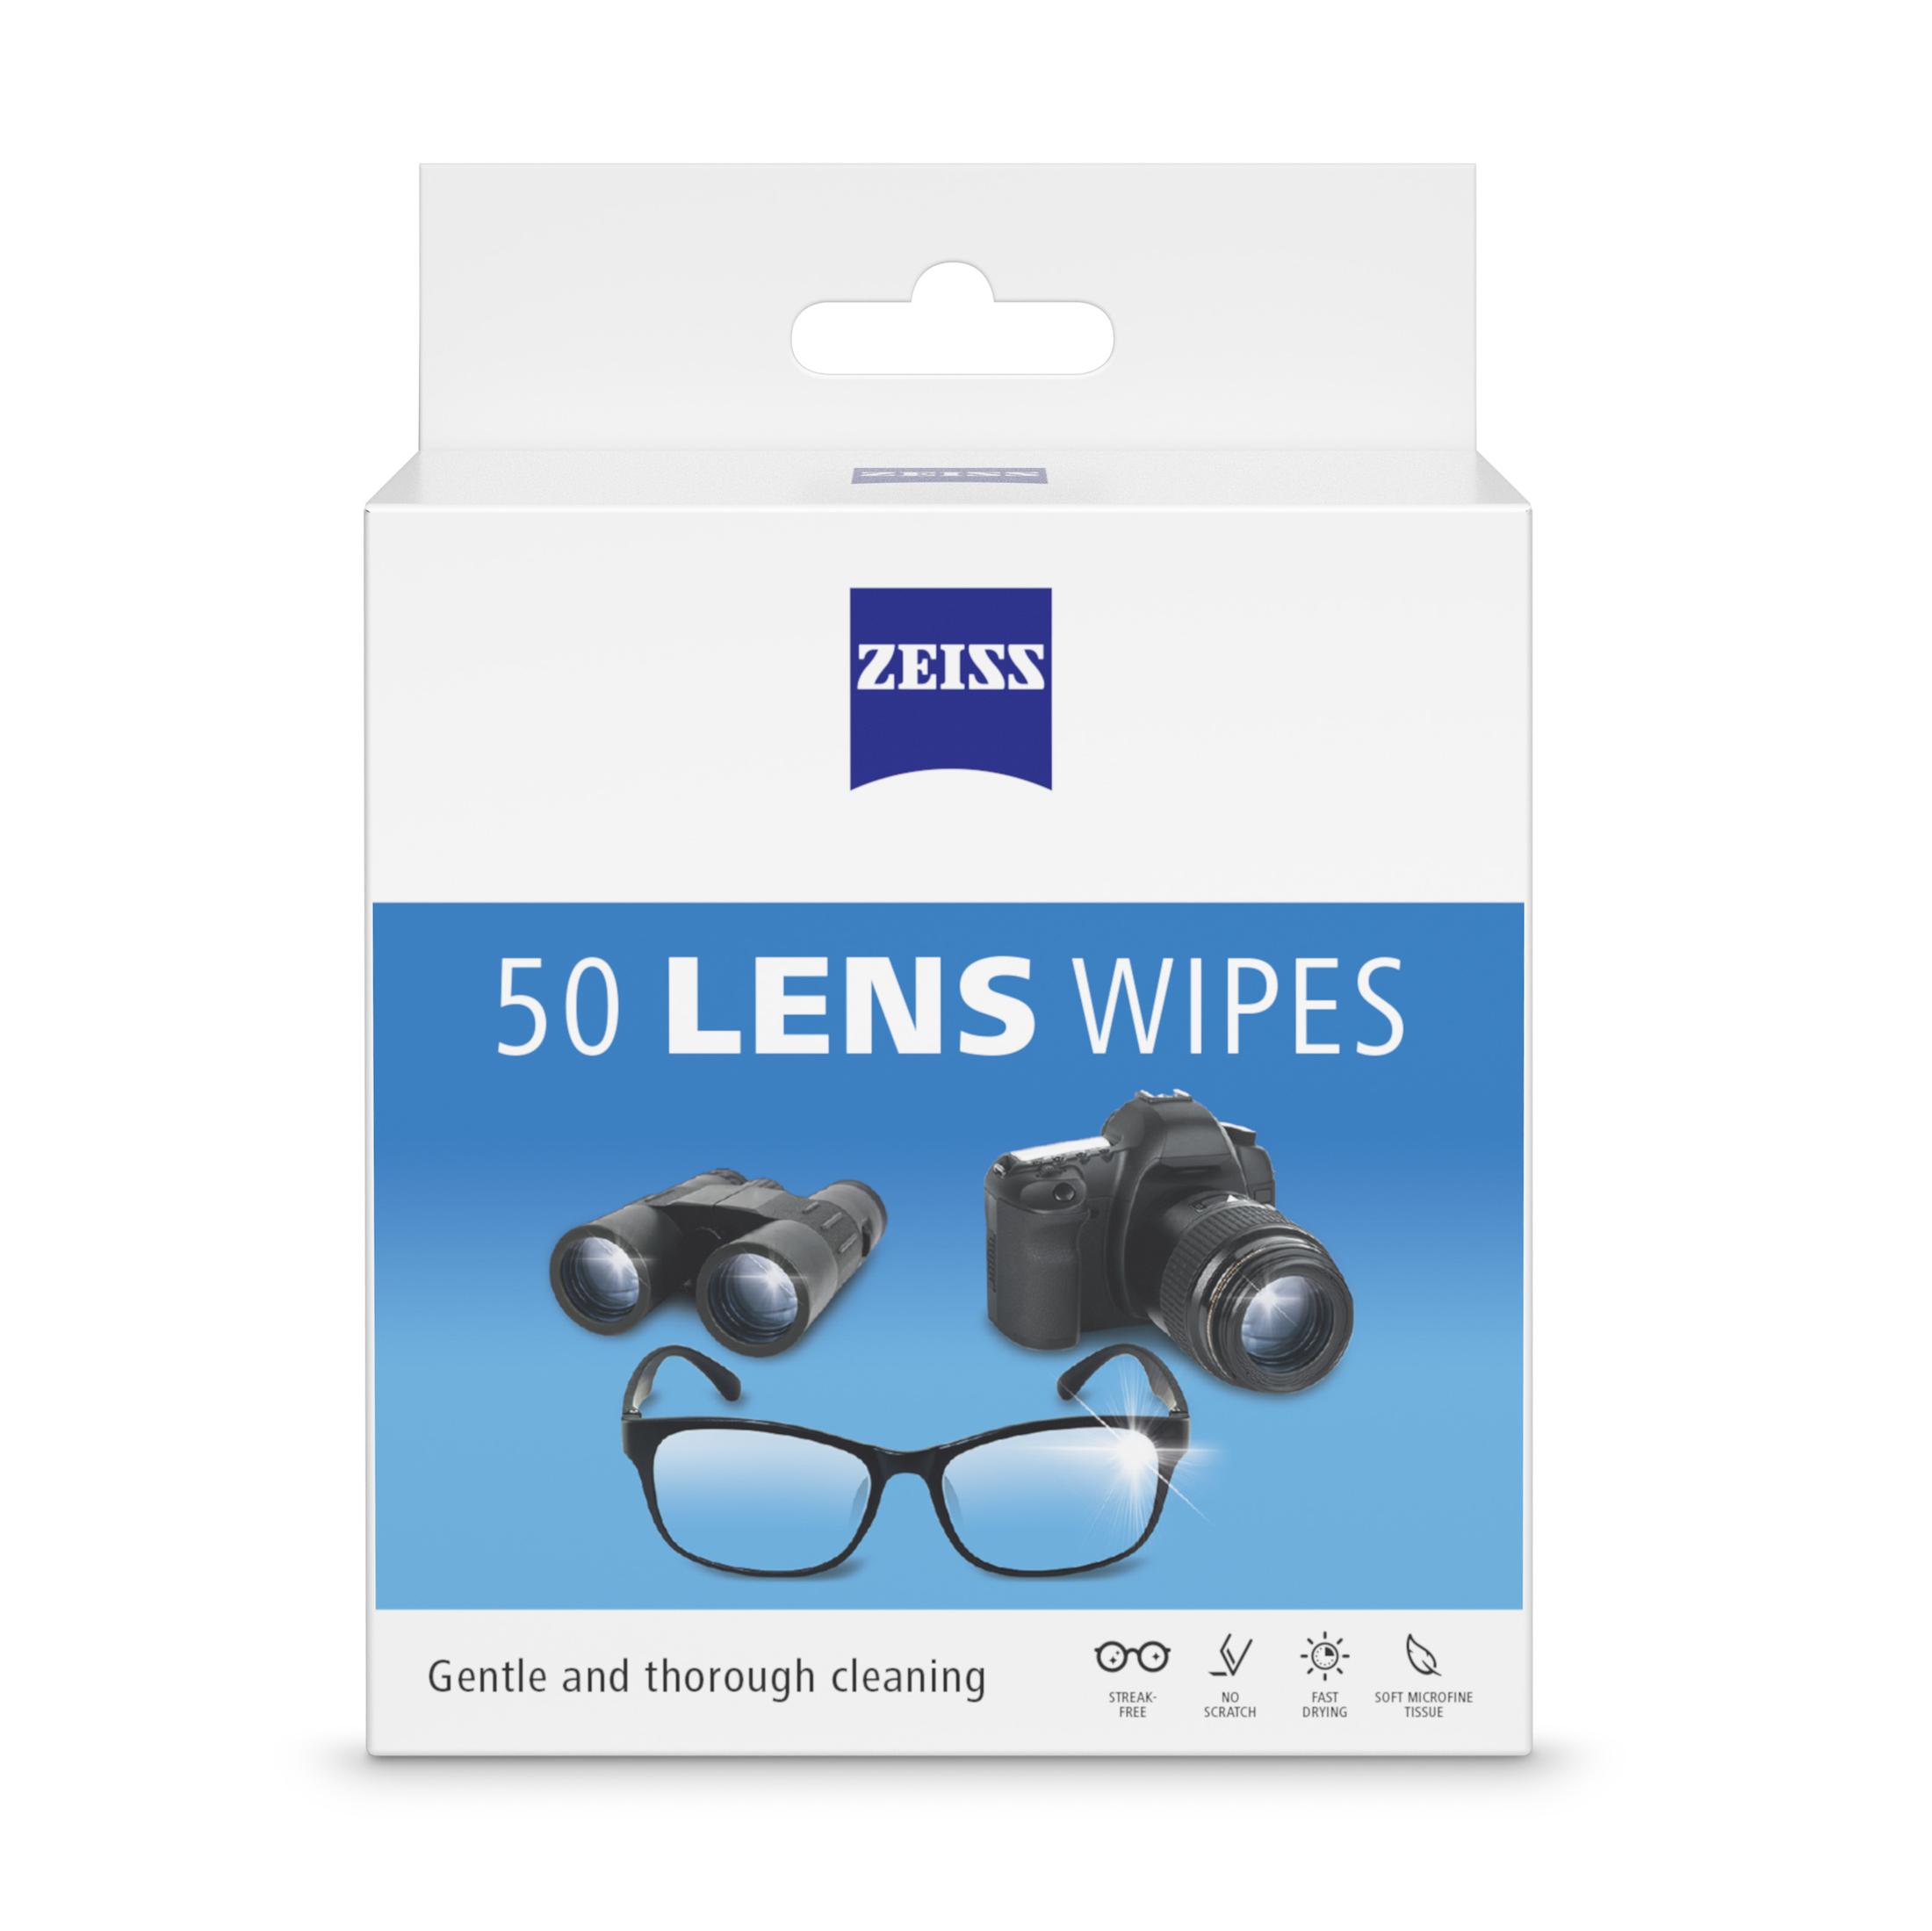 ZEISS Gentle and Thorough Cleaning Eyeglass Lens Cleaner Wipes, 50 Count - image 1 of 6